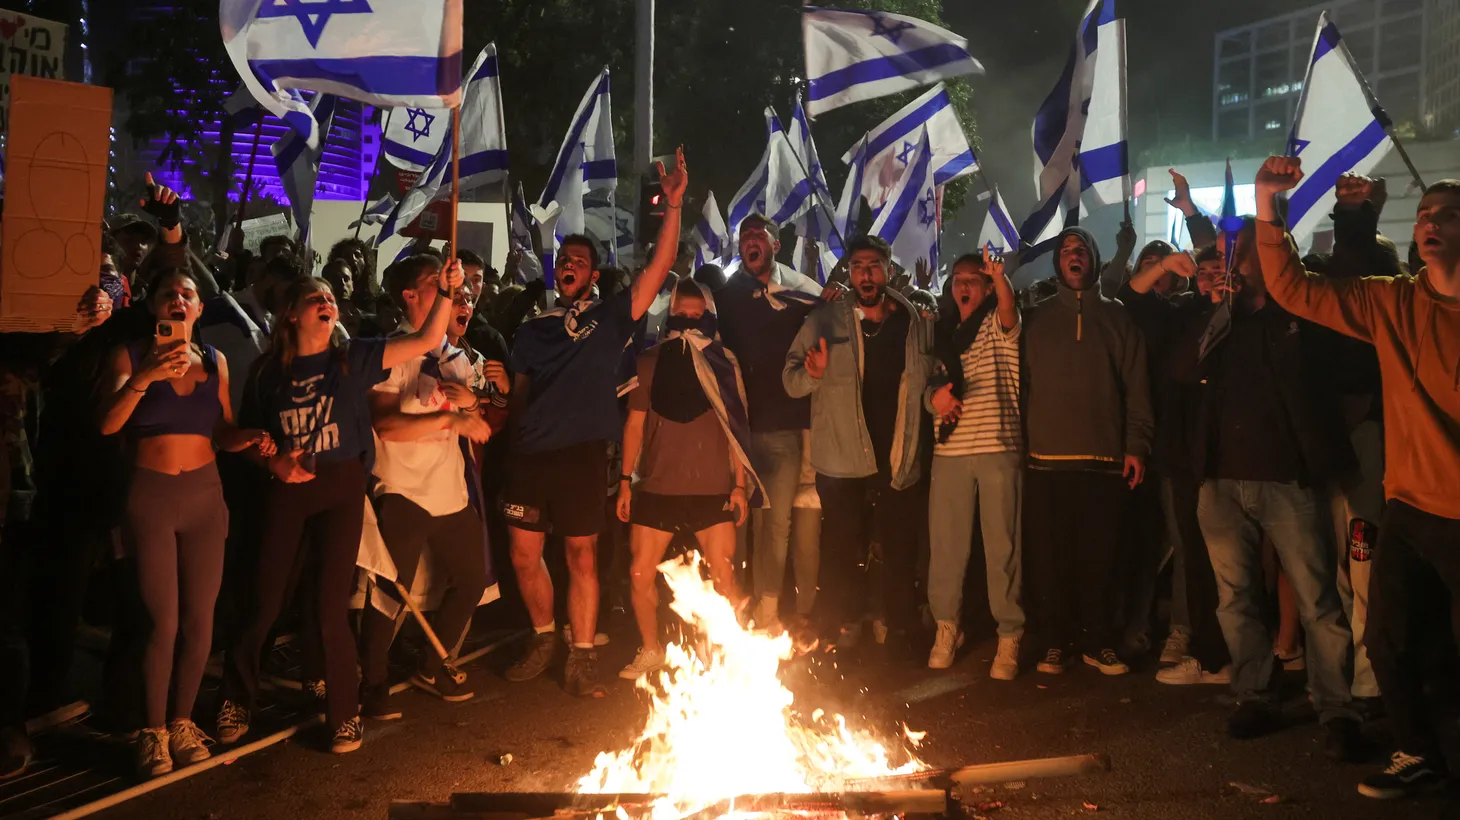 Israeli protesters chant in front of a burning fire at a demonstration against Israeli Prime Minister Benjamin Netanyahu and his nationalist coalition government's plan for judicial overhaul, in Tel Aviv, Israel, March 27, 2023.